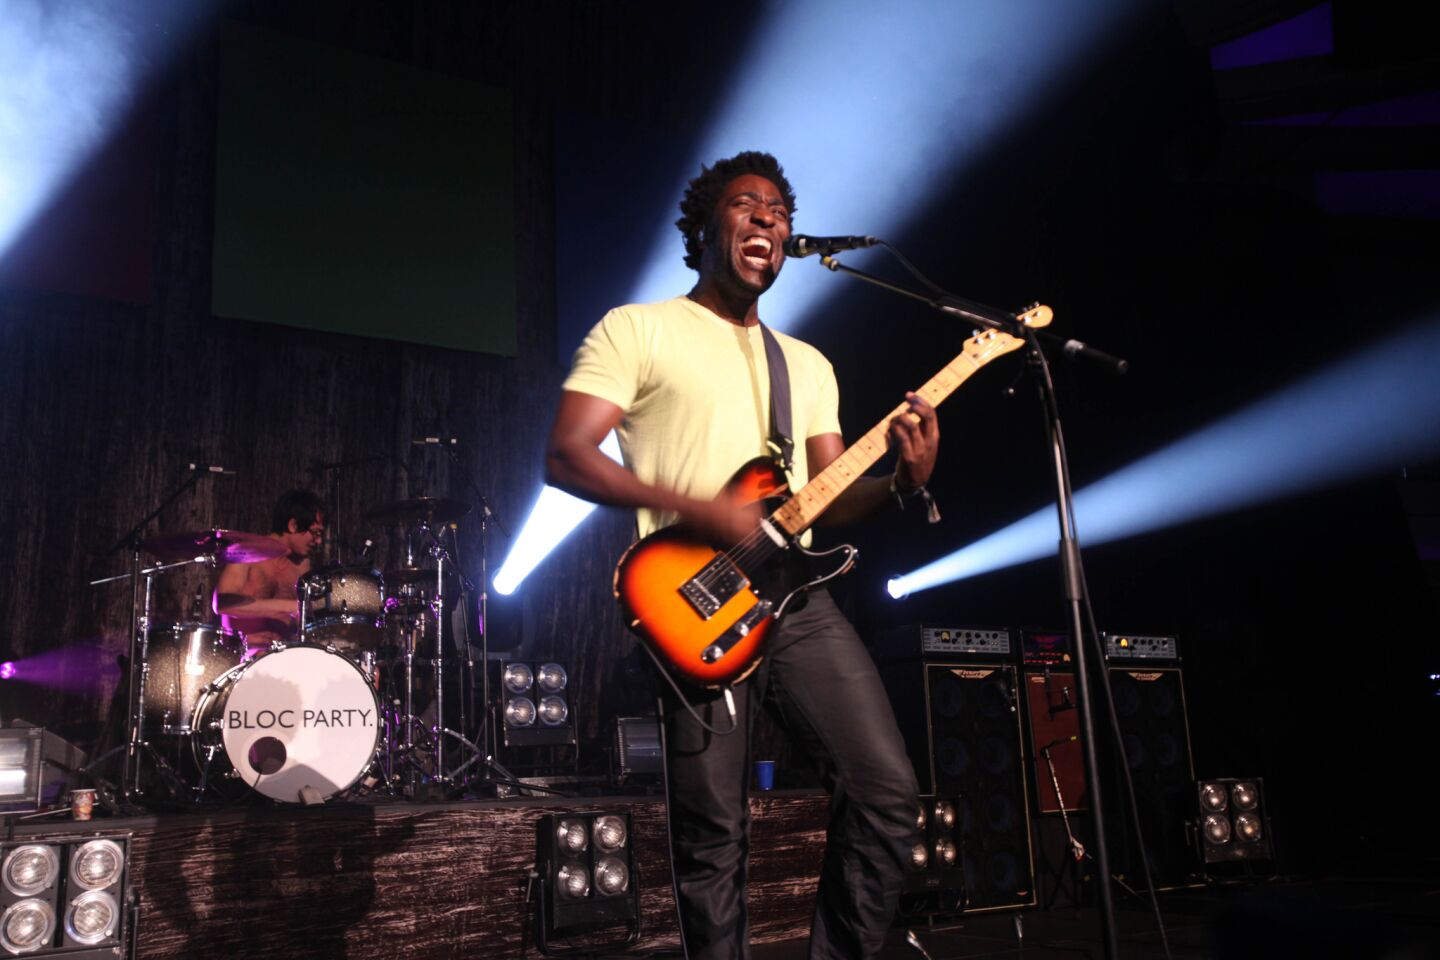 Bloc Party musician Kele Okereke gave several interviews with gay-oriented magazines until more openly discussing his sexuality during a 2007 interview with the Guardian.